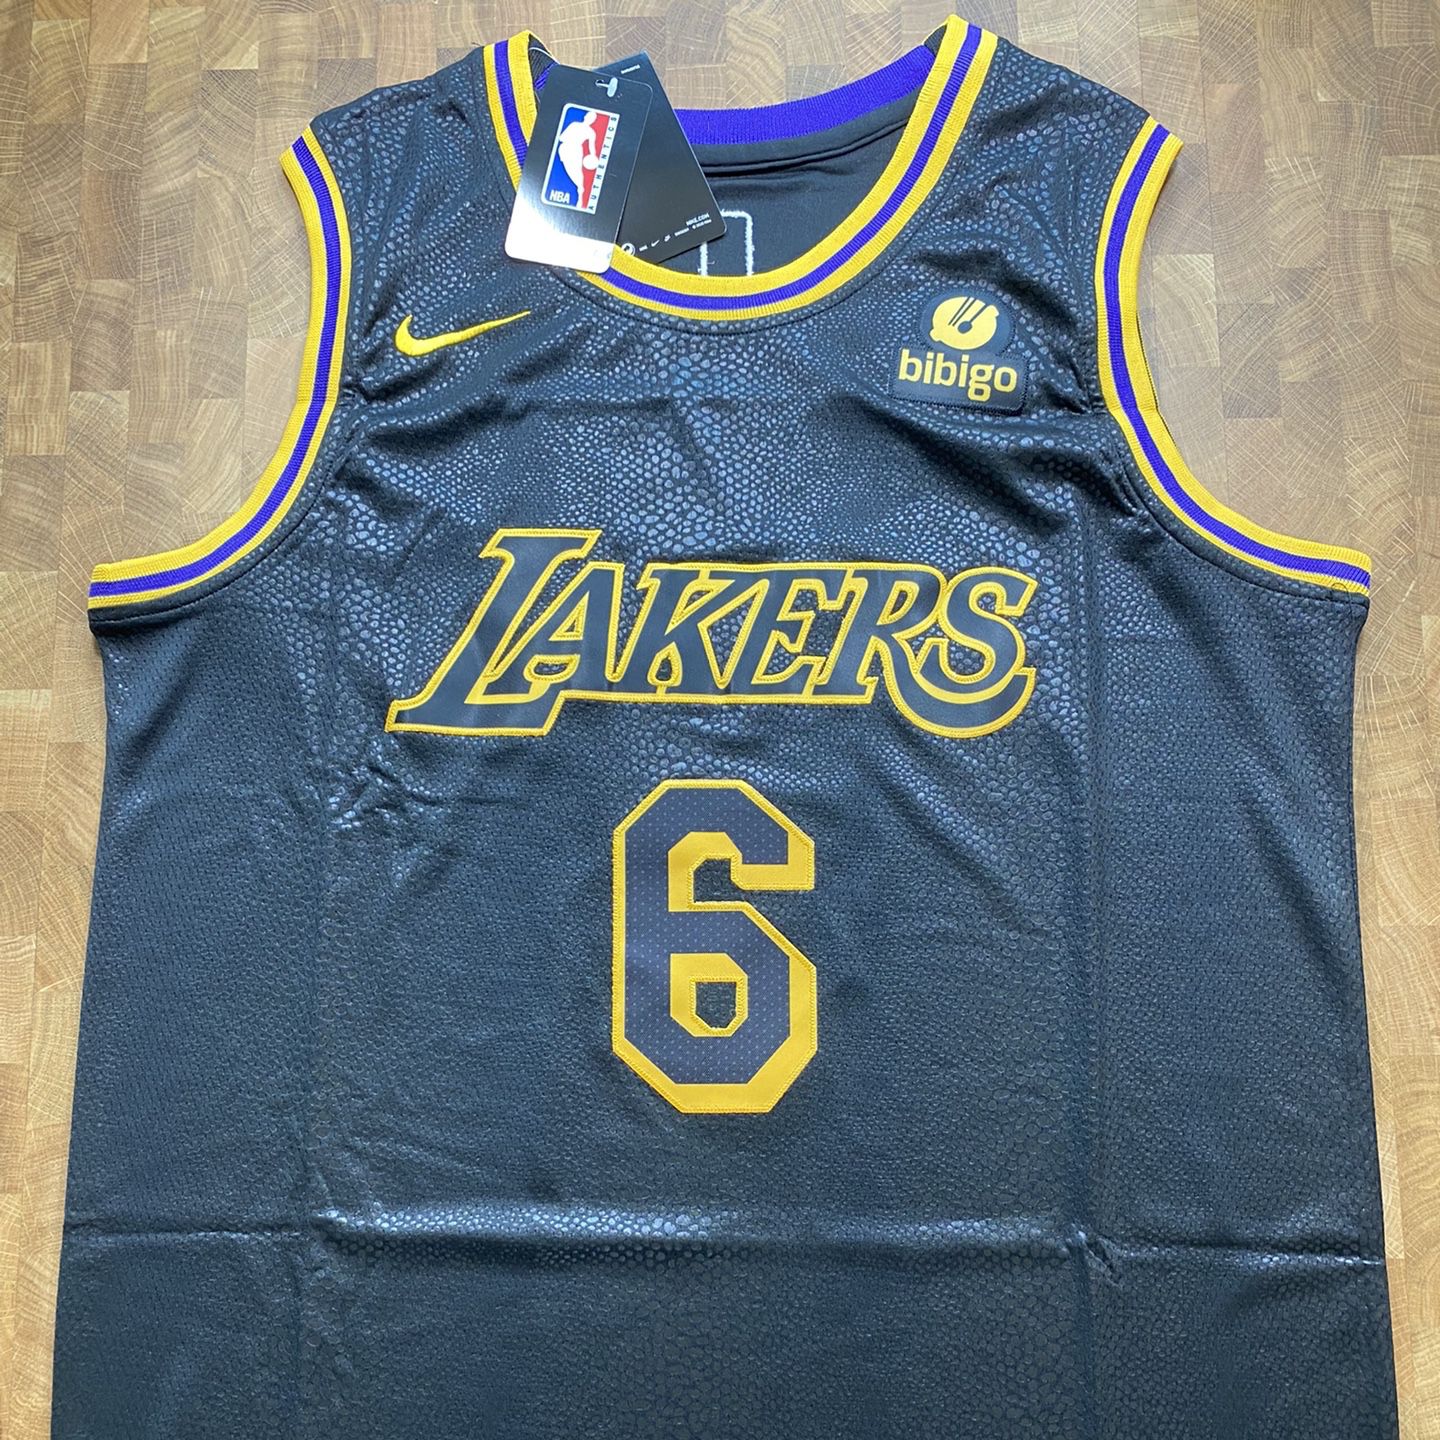 XL LeBron James Jersey And Shorts for Sale in Rancho Cordova, CA - OfferUp